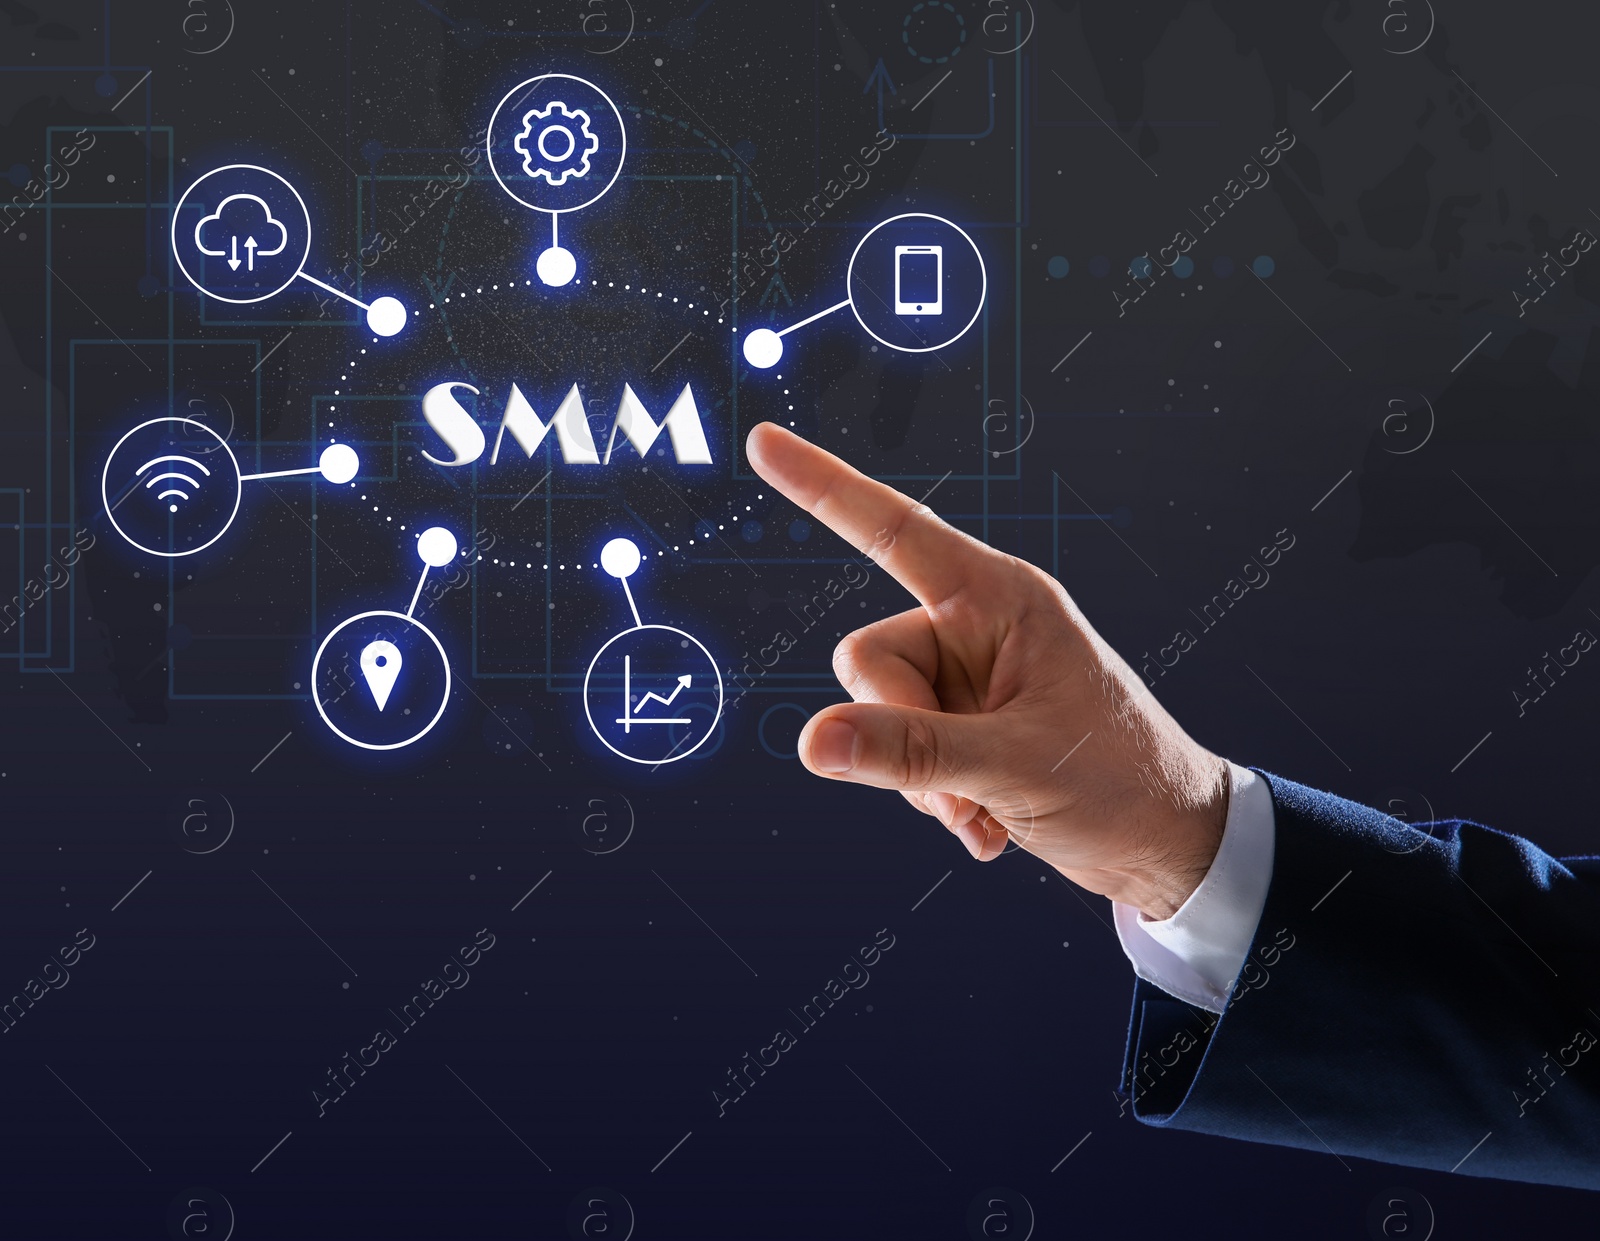 Image of Social media marketing concept. Man touching virtual icon SMM against dark background, closeup